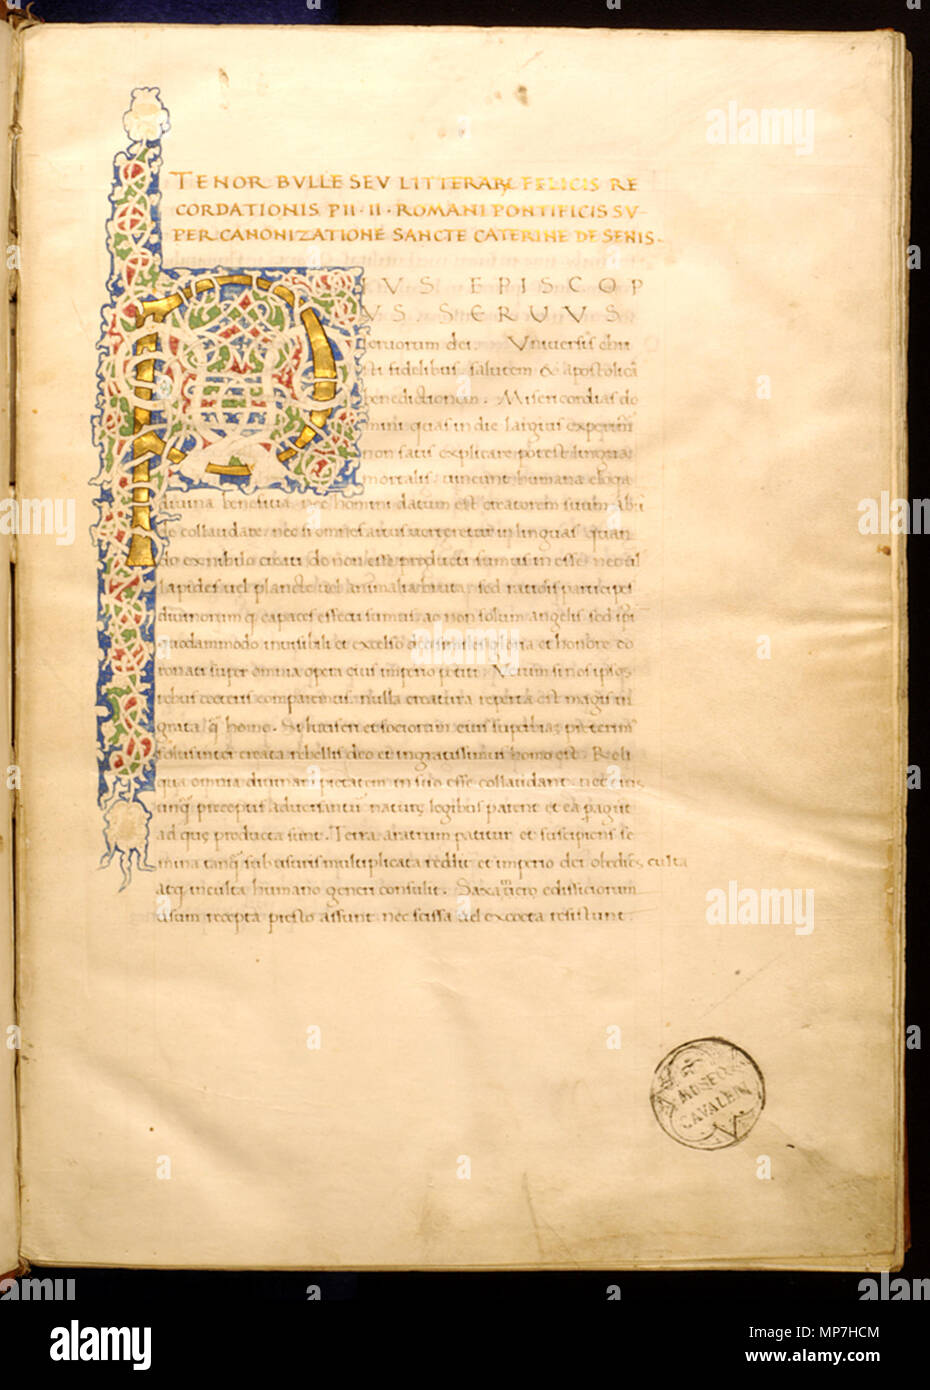 verlies fles groef Raymondo de Capua. 'Leaf from Legenda San Catherinae de Senis,' ca. 1470.  ink, paint and gold on parchment. Walters Art Museum (W.350.1R): Acquired  by Henry Walters. W.350.1R 685 Jacobus Macharius Venetus -